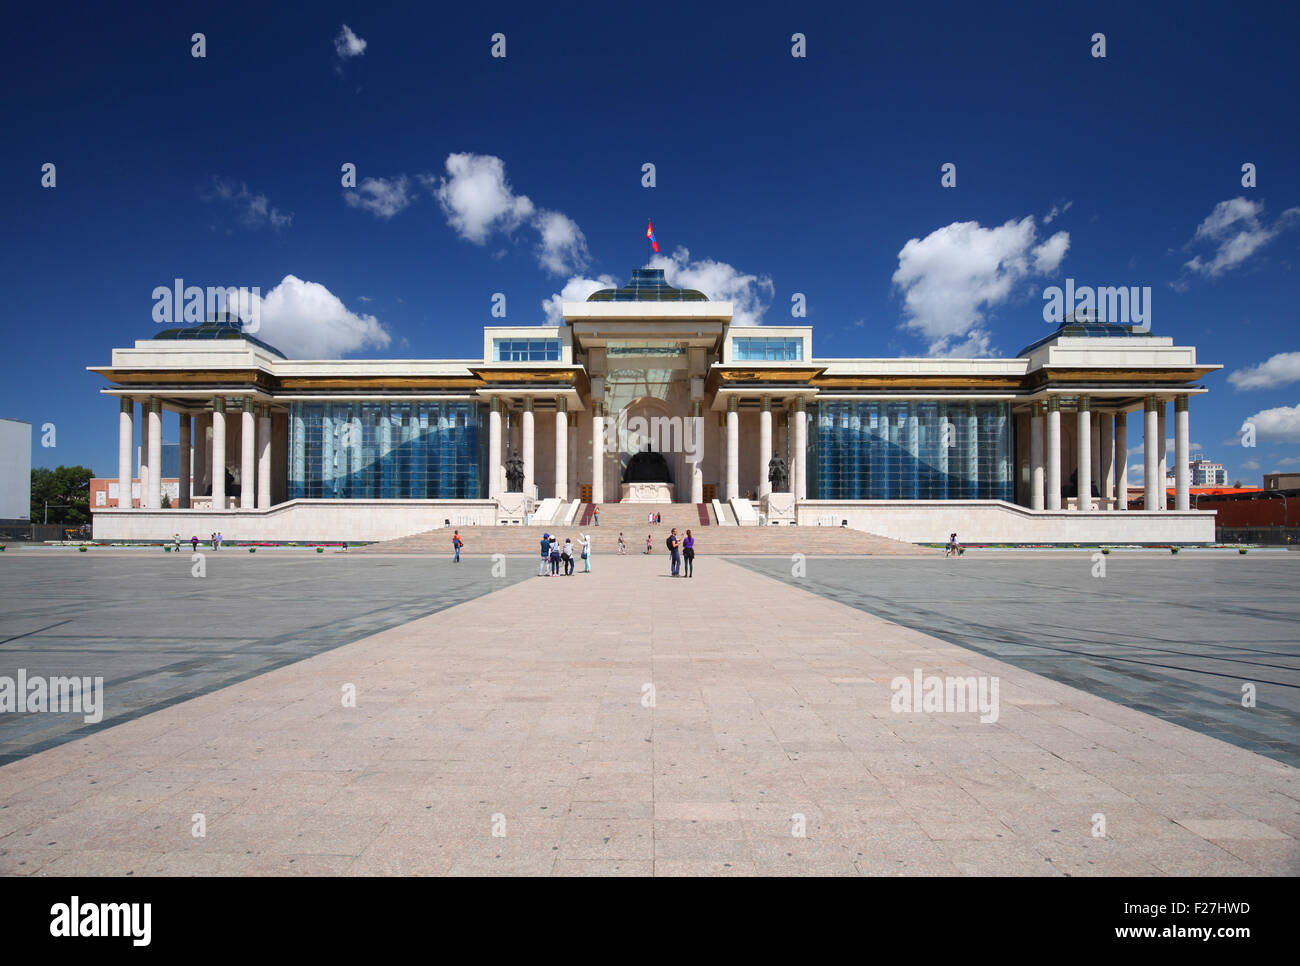 The Government Palace in Ulaanbaatar, Mongolia Stock Photo